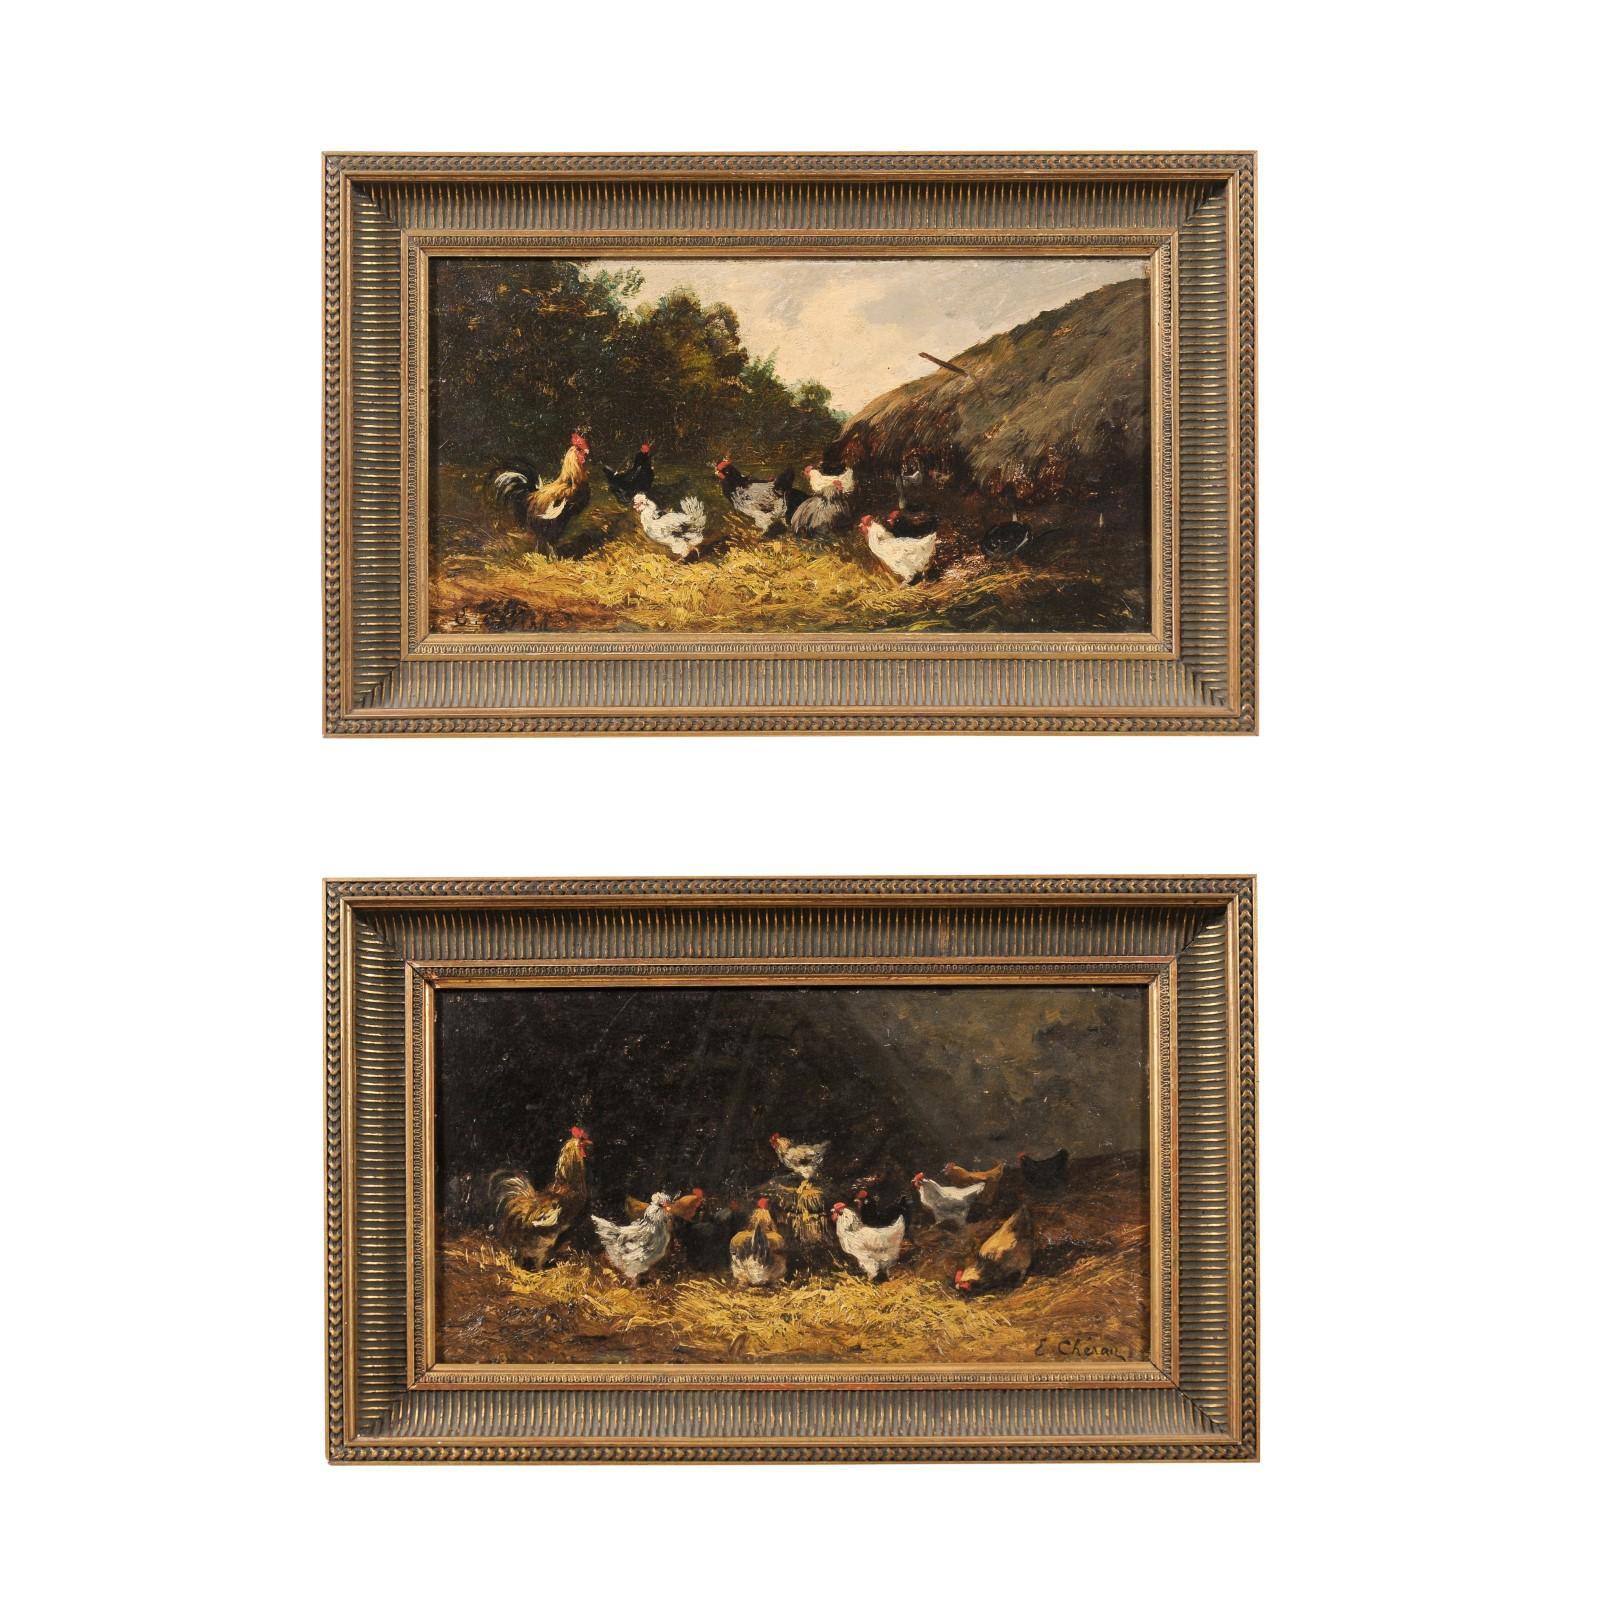 A pair of French framed oil on board paintings from the early 20th century, depicting chickens. Created in France during the early years of the 20th century, each of this pair of paintings depicts a farm scene dominated by the presence of a rooster